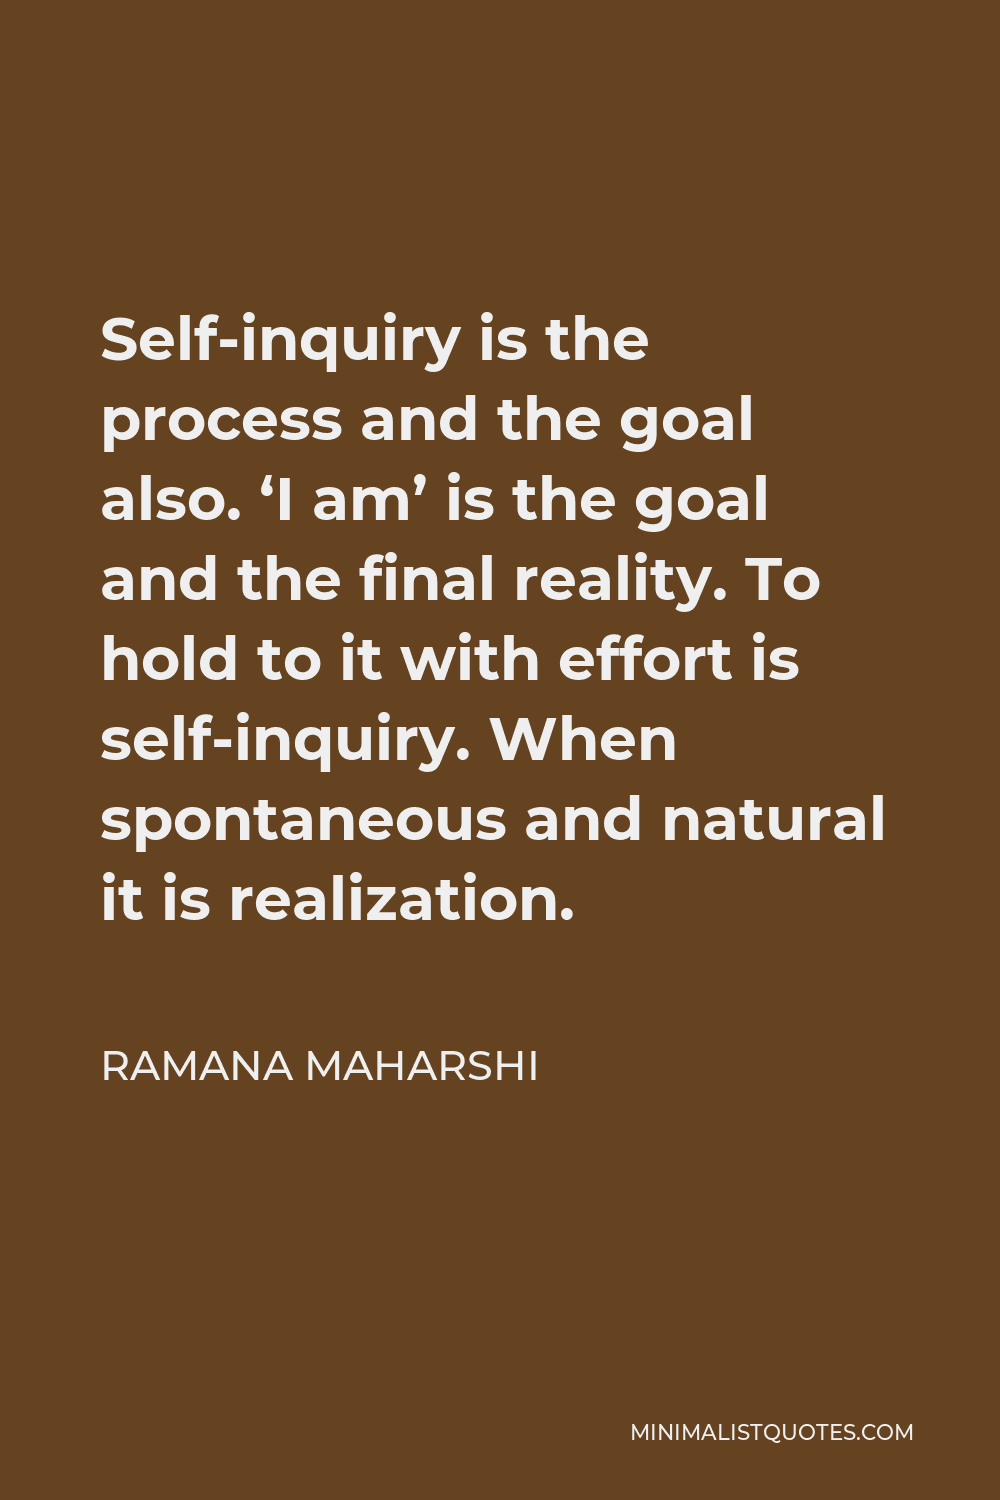 Ramana Maharshi Quote - Self-inquiry is the process and the goal also. ‘I am’ is the goal and the final reality. To hold to it with effort is self-inquiry. When spontaneous and natural it is realization.